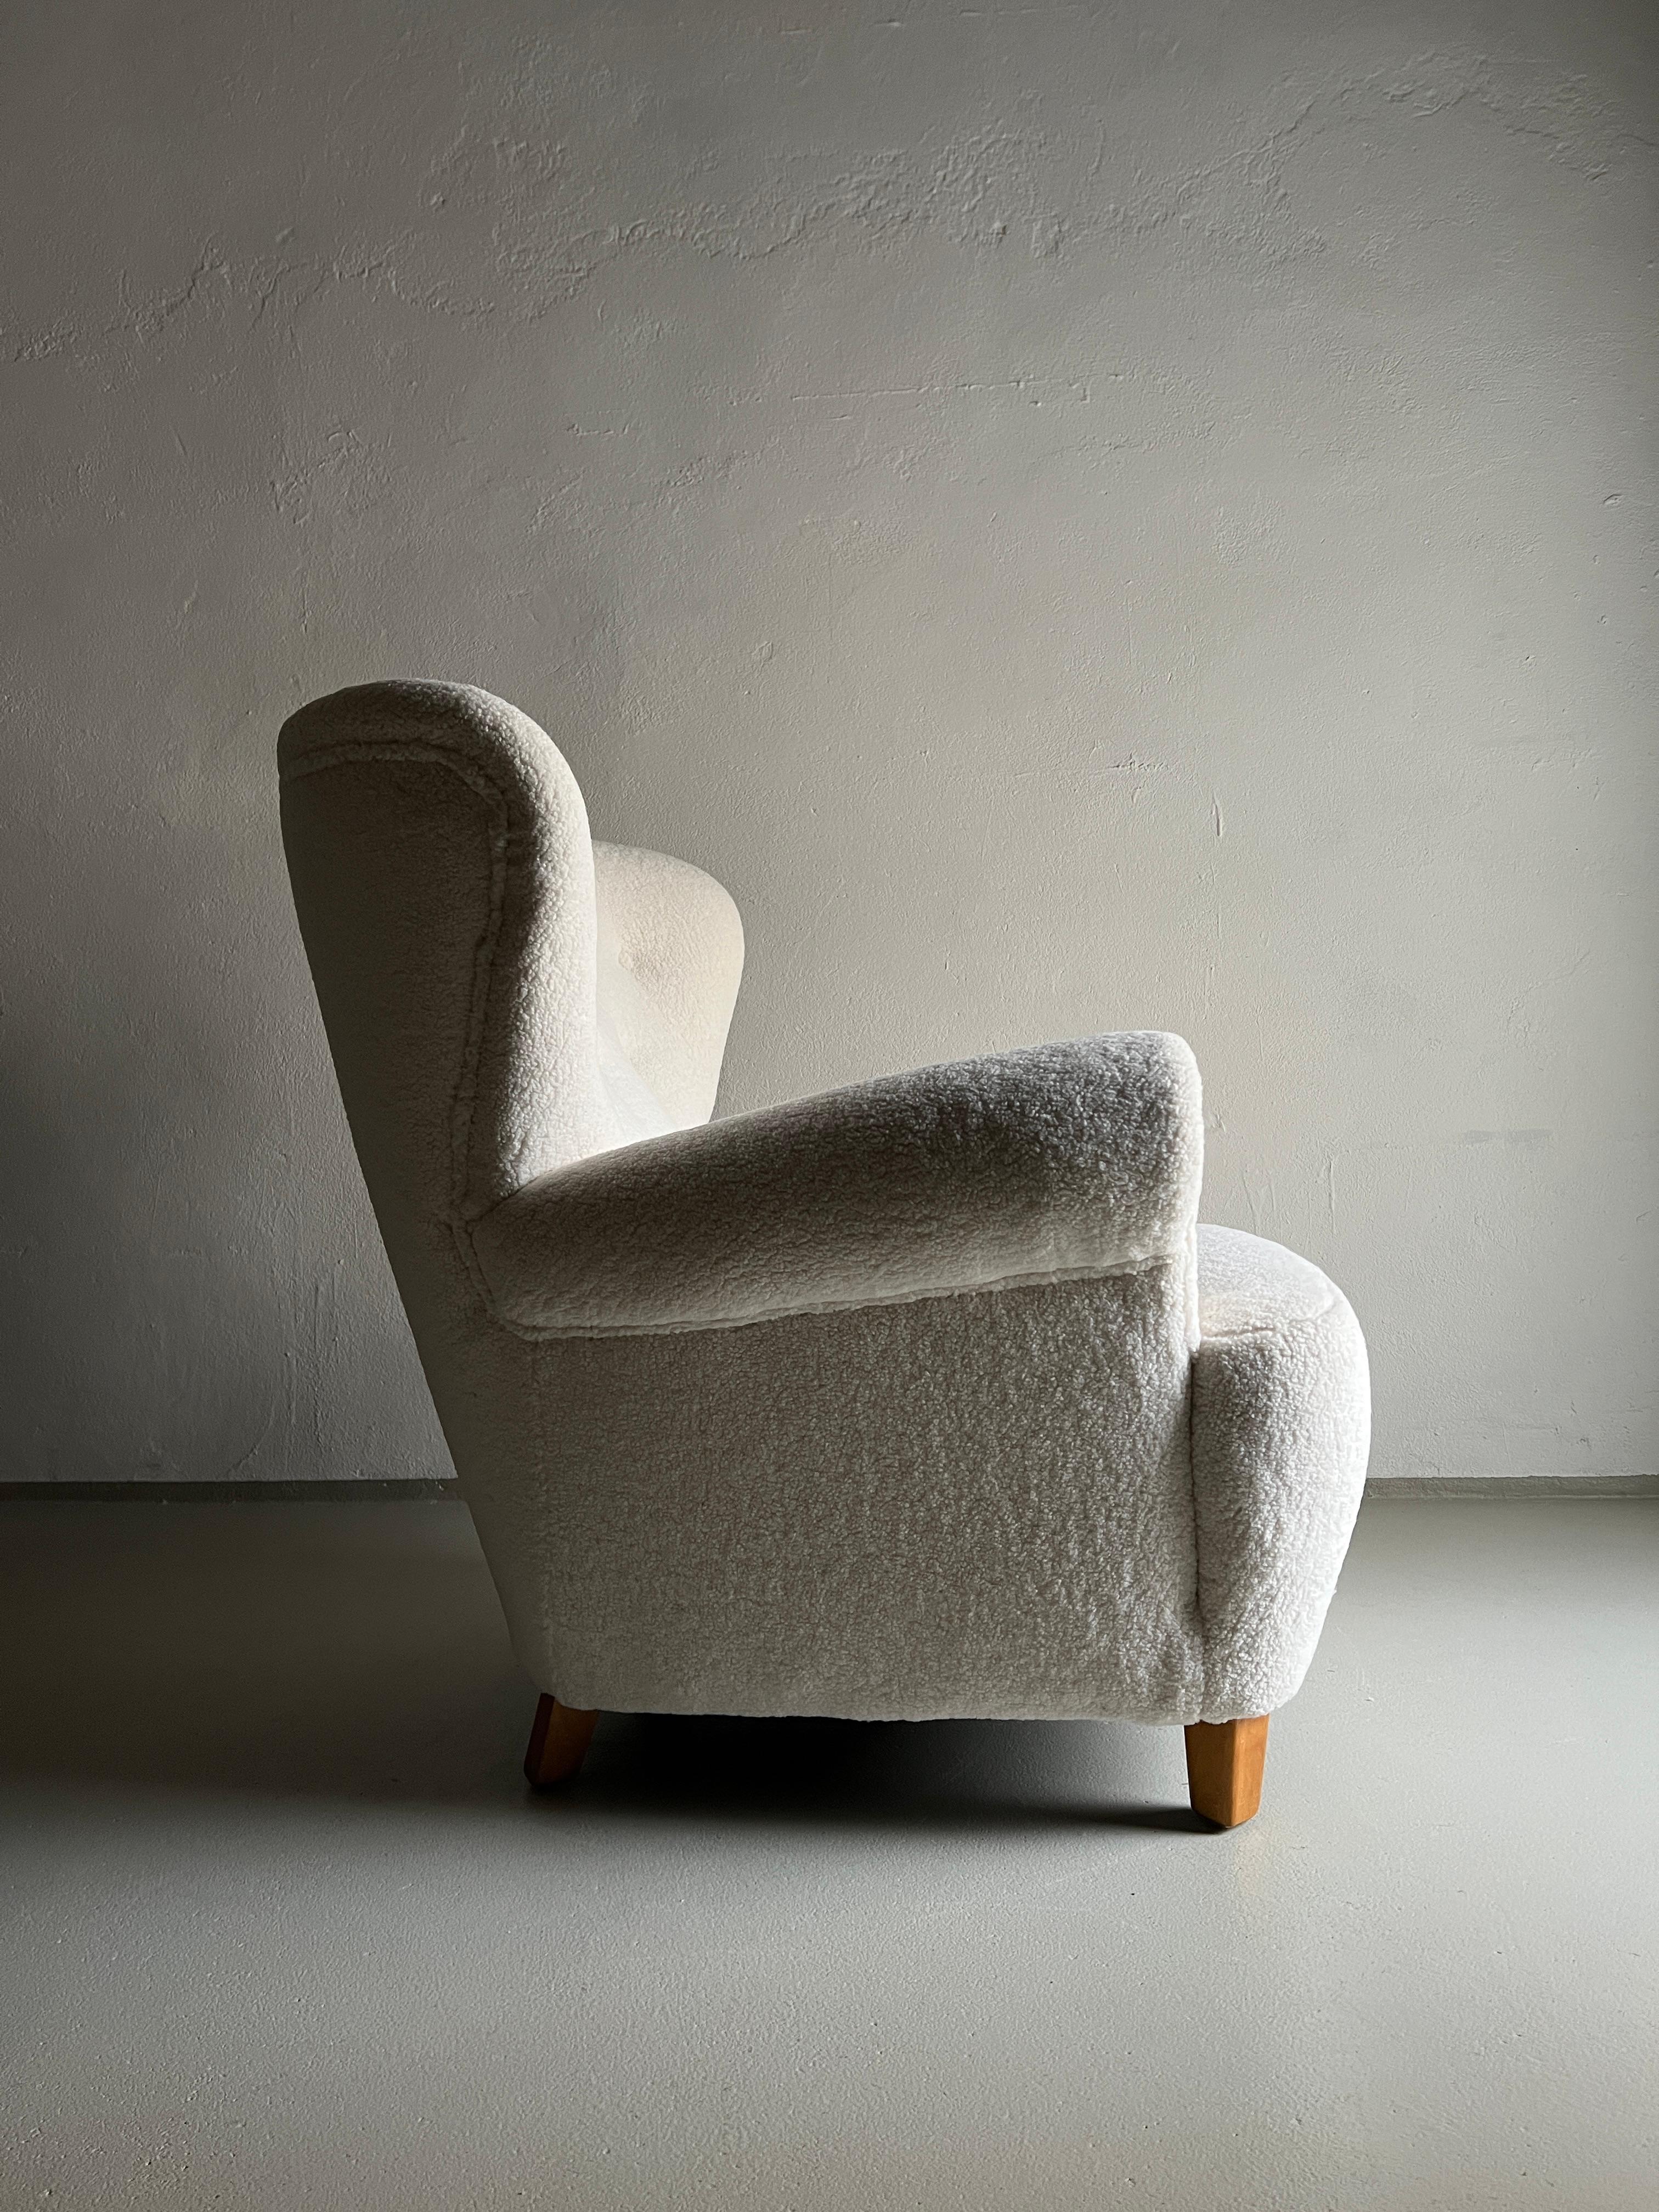 Mid-20th Century Danish White Faux Shearling Lounge Chair, 1940s